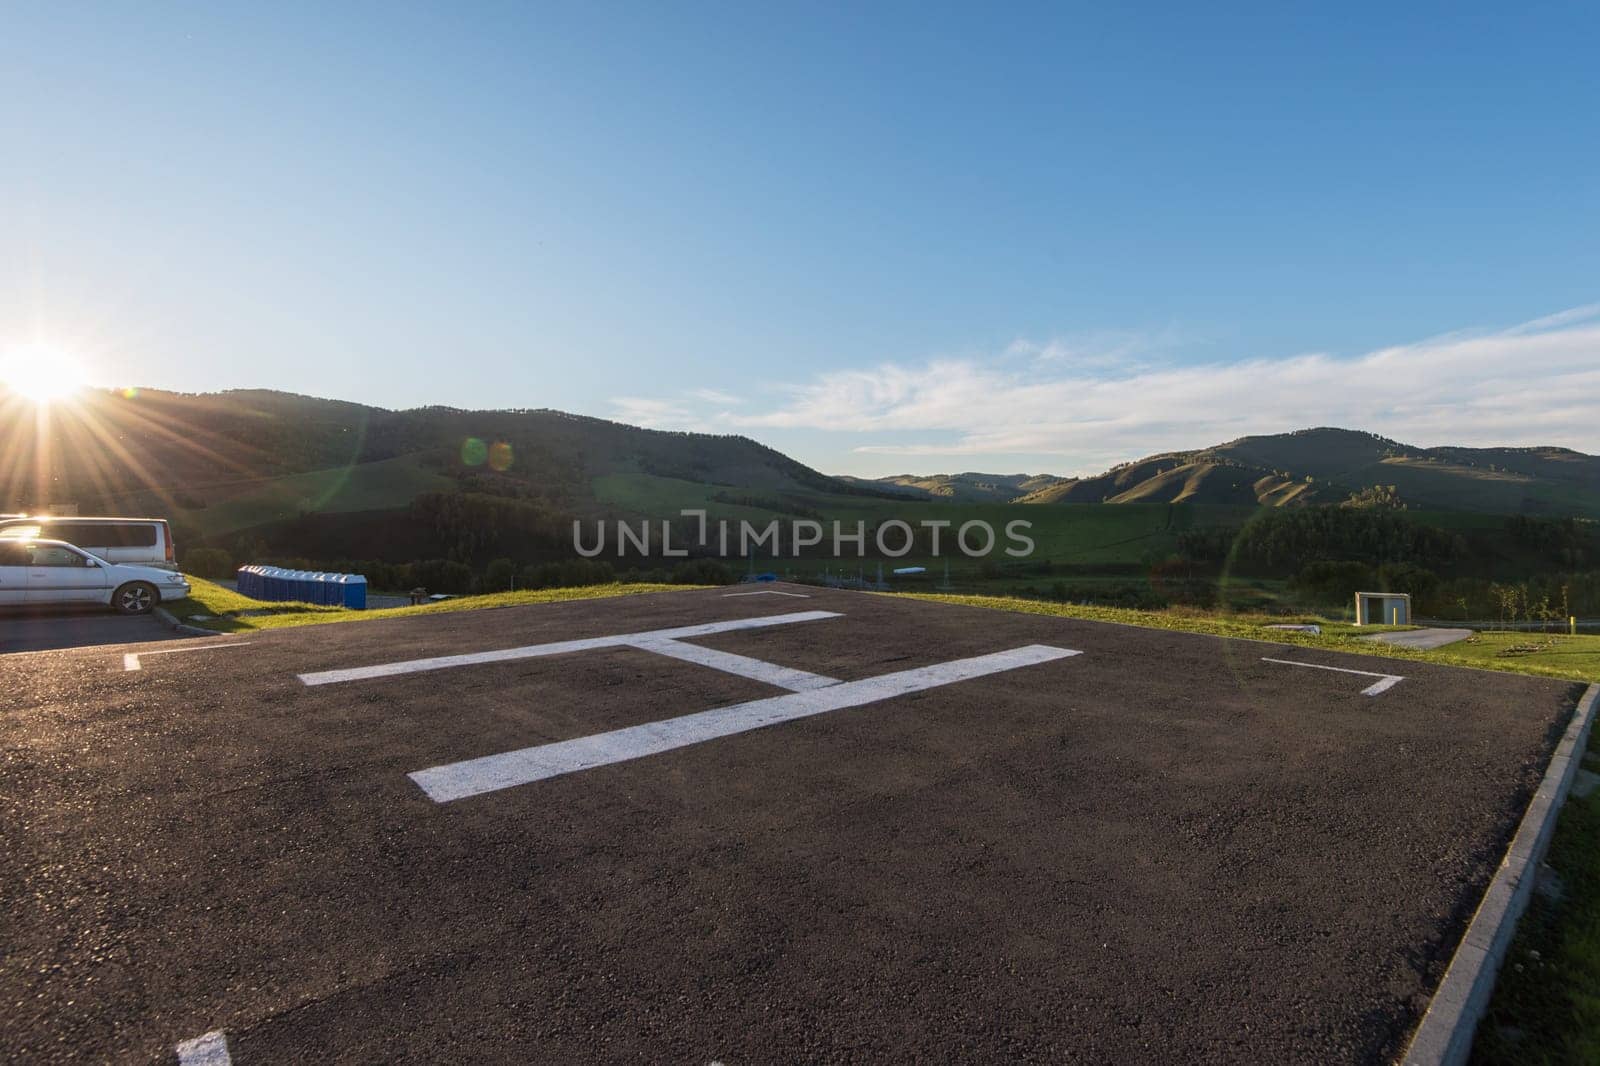 Helicopter pad on Altai mountains in summer season.